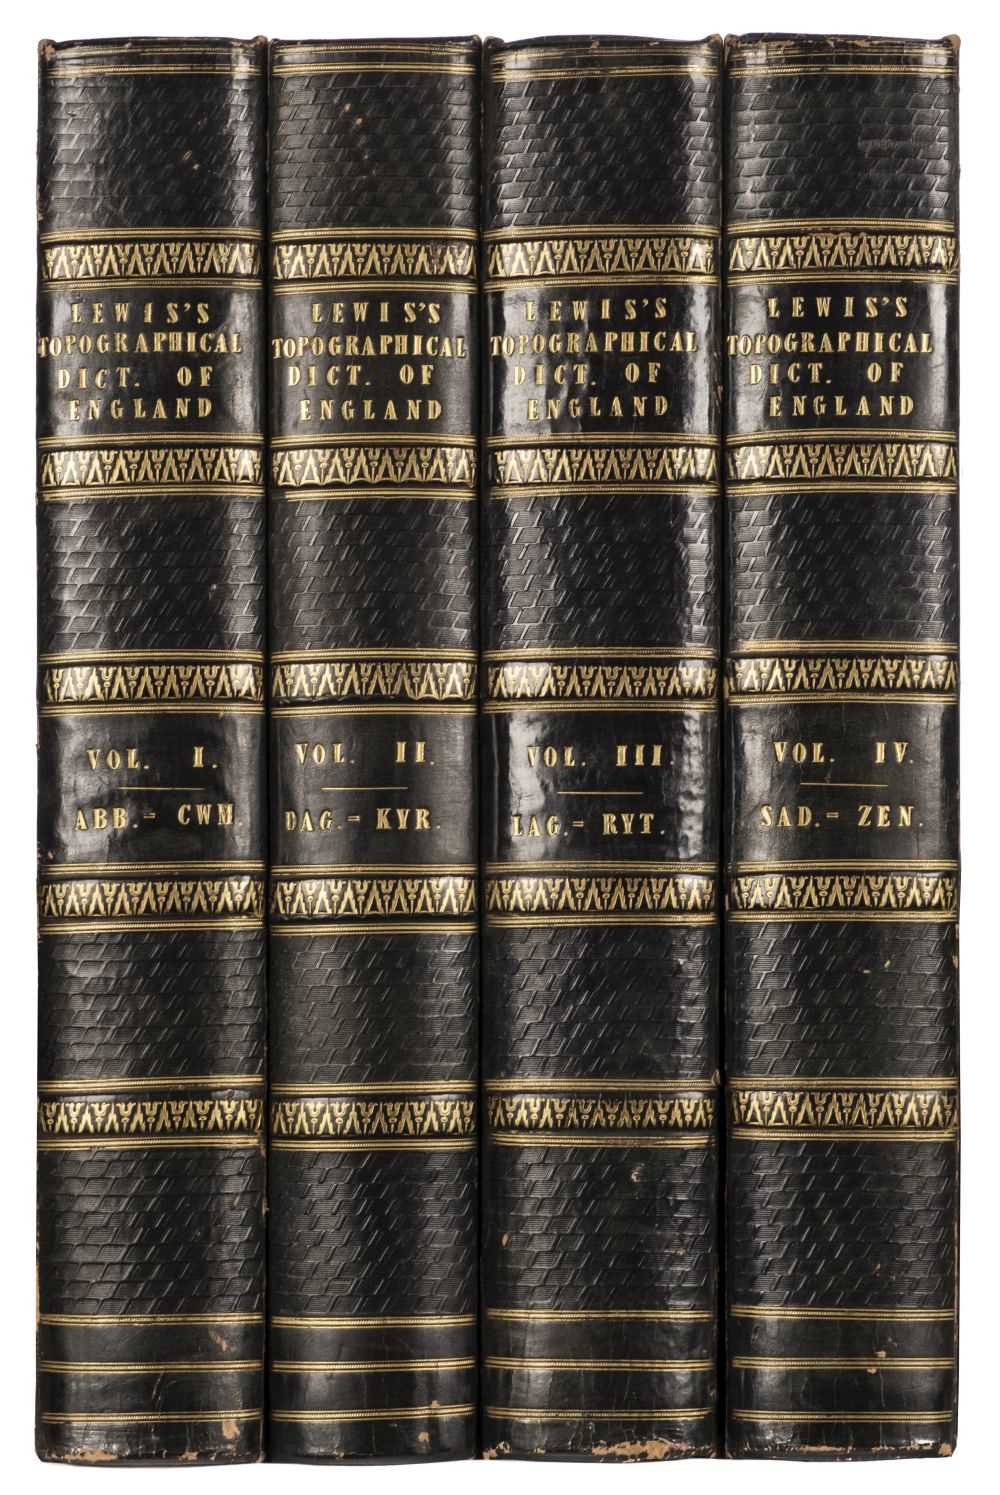 Lot 46 - Lewis (Samuel). A Topographical Dictionary of England, 4 volumes, 1831